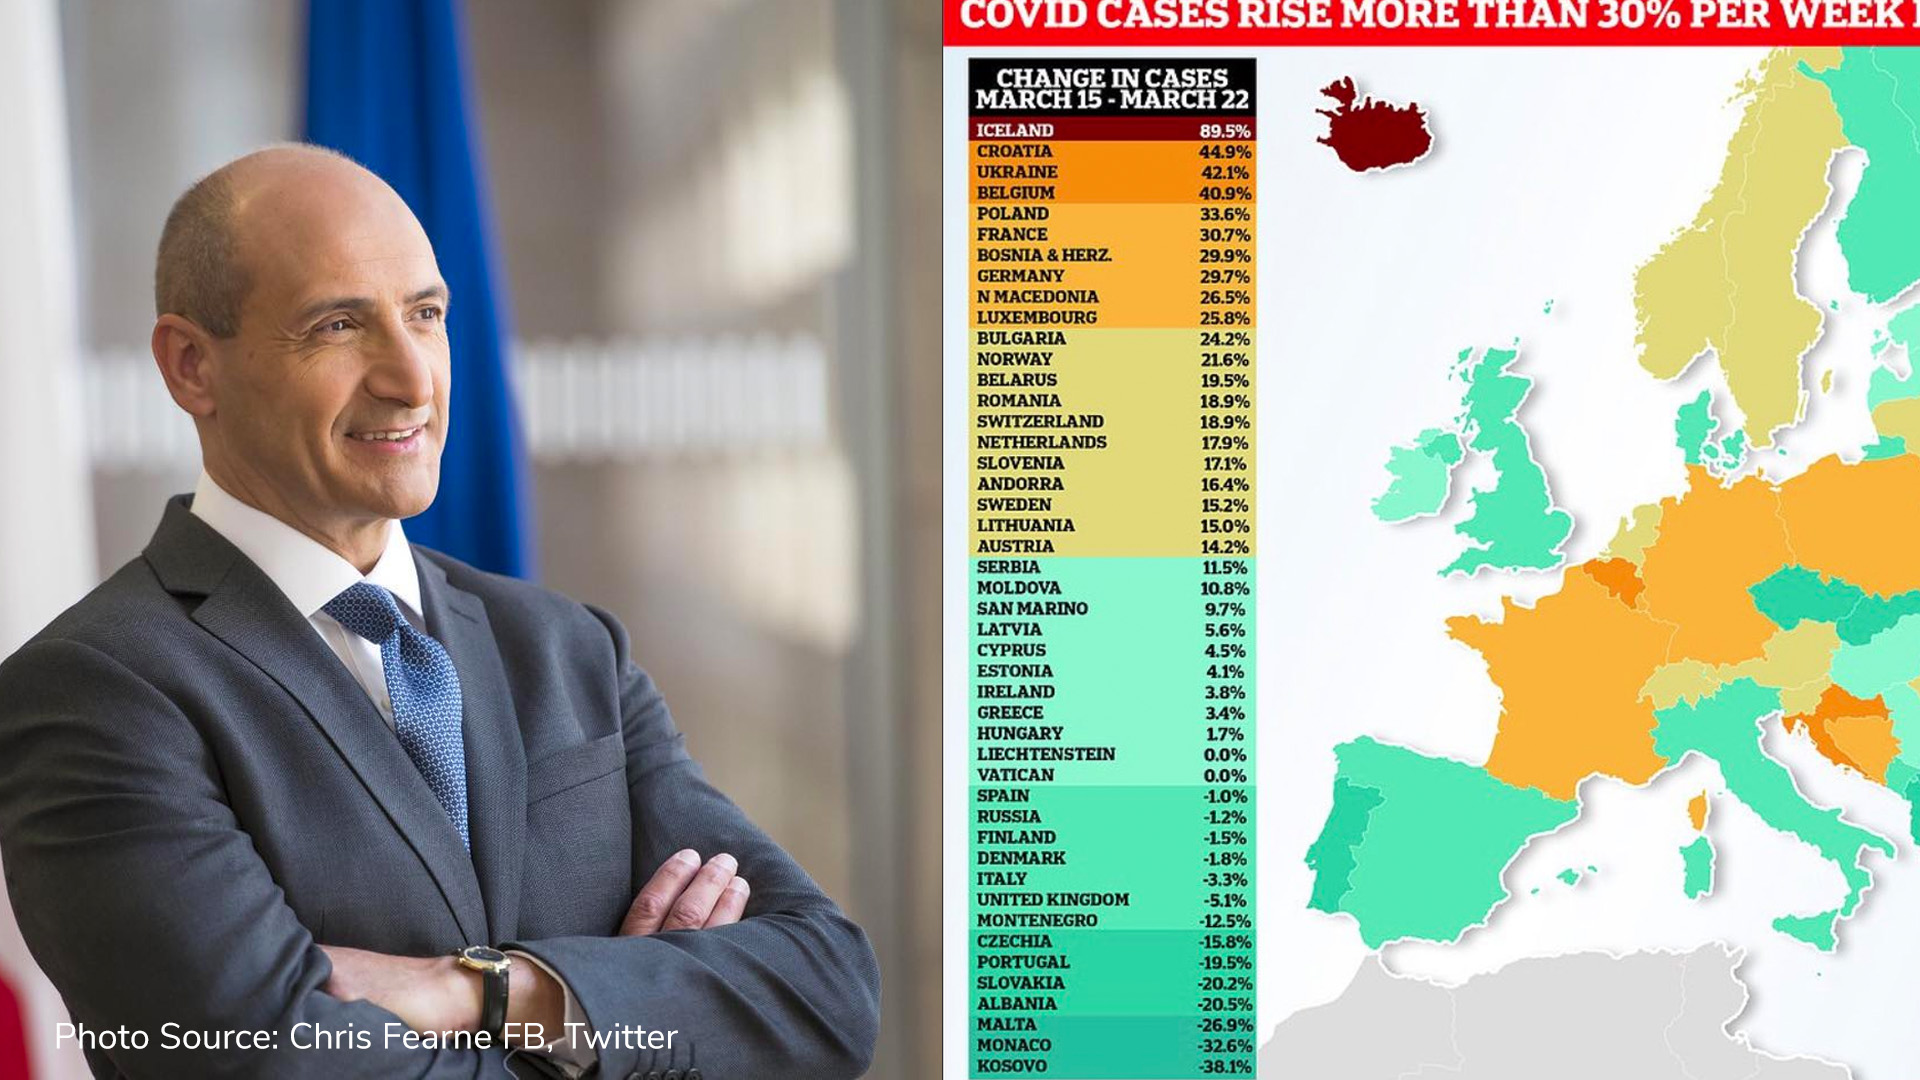 Malta with the highest reduction of COVID-19 cases out of EU countries